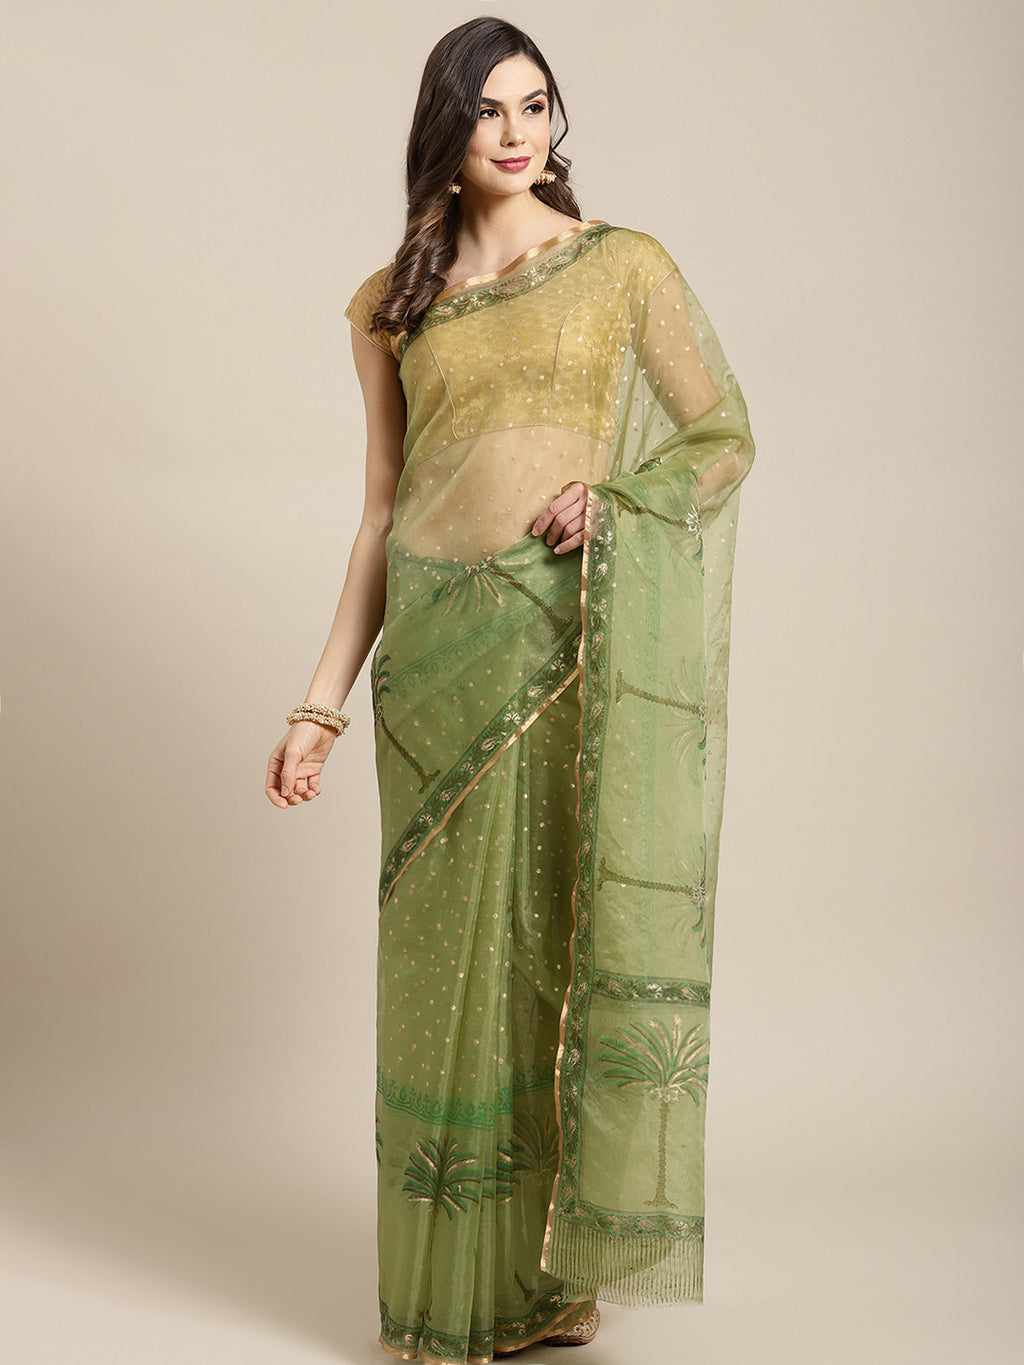 Green and , Kalakari India Organza Hand Block Print Saree with blouse BHKPSA0152-Saree-Kalakari India-BHKPSA0152-Geographical Indication, Hand Crafted, Hand Painted, Heritage Prints, Natural Dyes, Organza, Red, Sarees, Sustainable Fabrics, Woven, Yellow-[Linen,Ethnic,wear,Fashionista,Handloom,Handicraft,Indigo,blockprint,block,print,Cotton,Chanderi,Blue, latest,classy,party,bollywood,trendy,summer,style,traditional,formal,elegant,unique,style,hand,block,print, dabu,booti,gift,present,glamorous,a